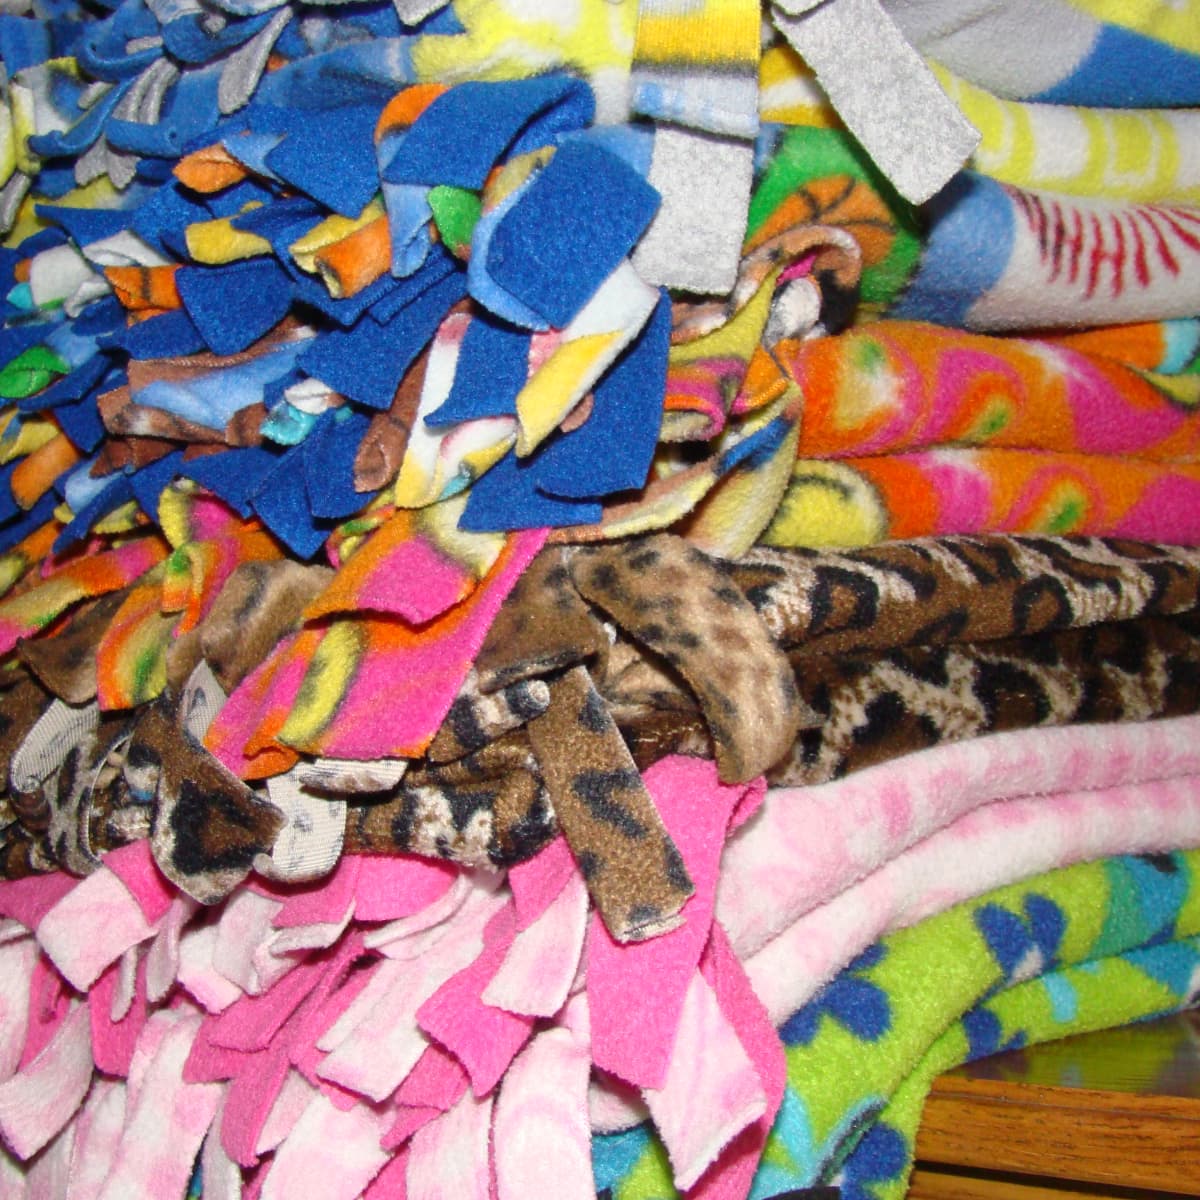 How to Make a No-Sew Fleece Tie Blanket - HubPages